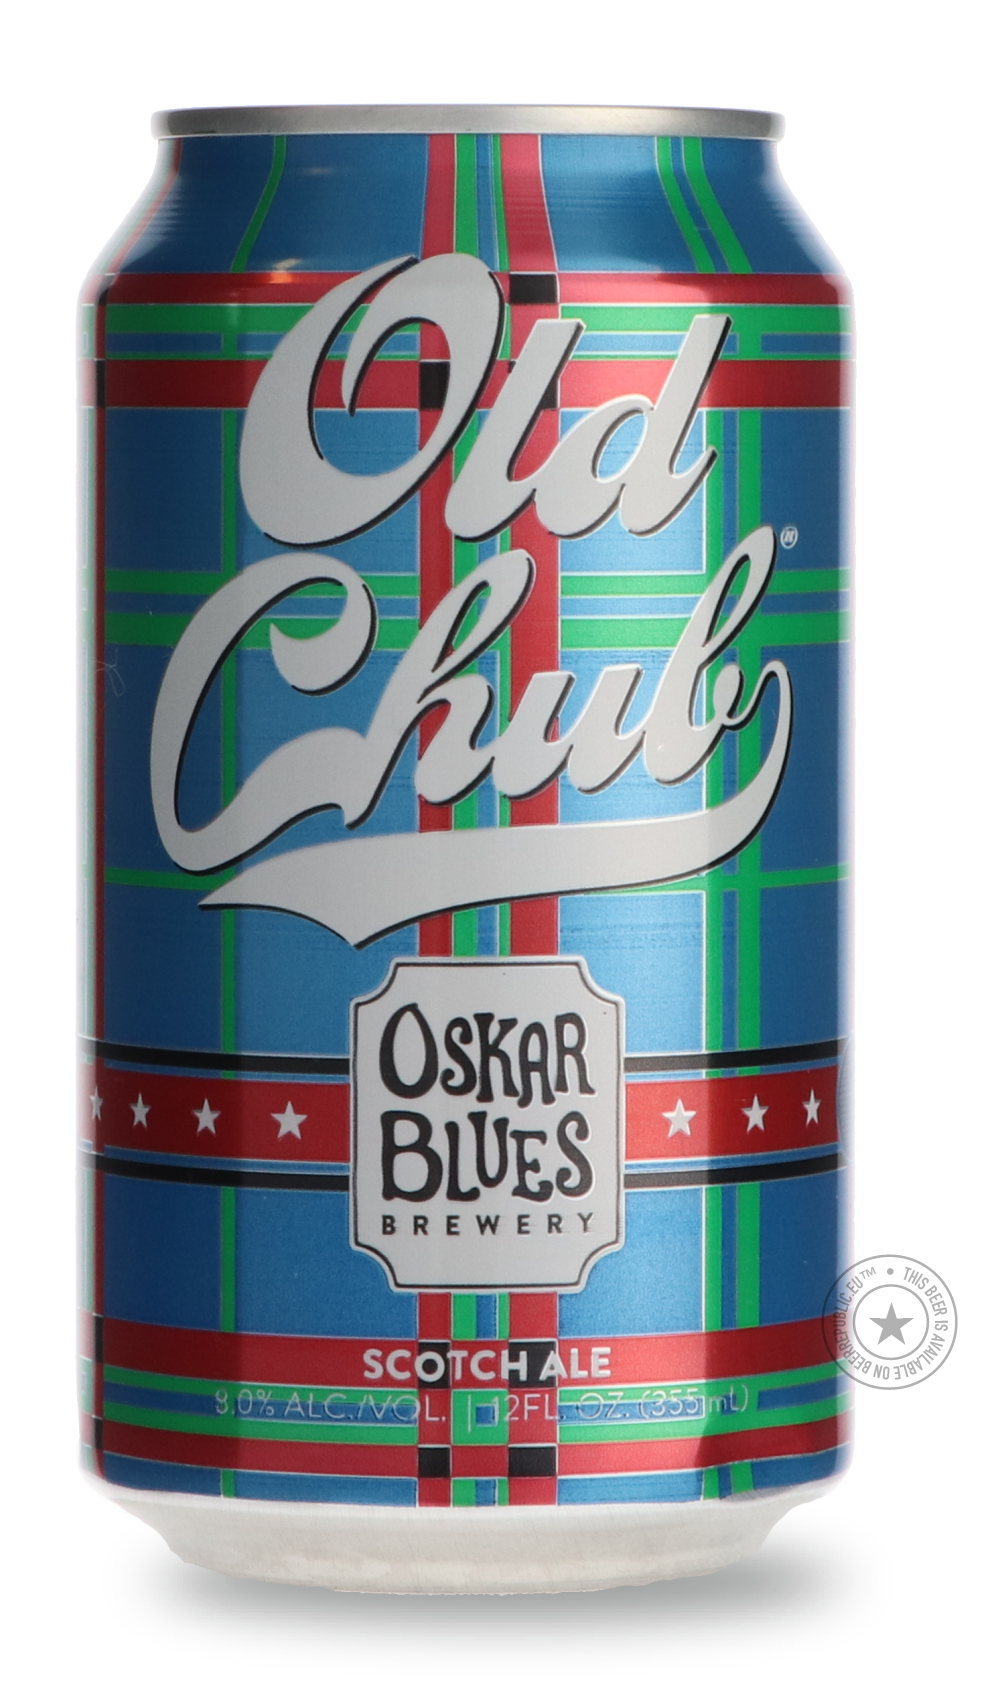 -Oskar Blues- Old Chub-Brown & Dark- Only @ Beer Republic - The best online beer store for American & Canadian craft beer - Buy beer online from the USA and Canada - Bier online kopen - Amerikaans bier kopen - Craft beer store - Craft beer kopen - Amerikanisch bier kaufen - Bier online kaufen - Acheter biere online - IPA - Stout - Porter - New England IPA - Hazy IPA - Imperial Stout - Barrel Aged - Barrel Aged Imperial Stout - Brown - Dark beer - Blond - Blonde - Pilsner - Lager - Wheat - Weizen - Amber - B